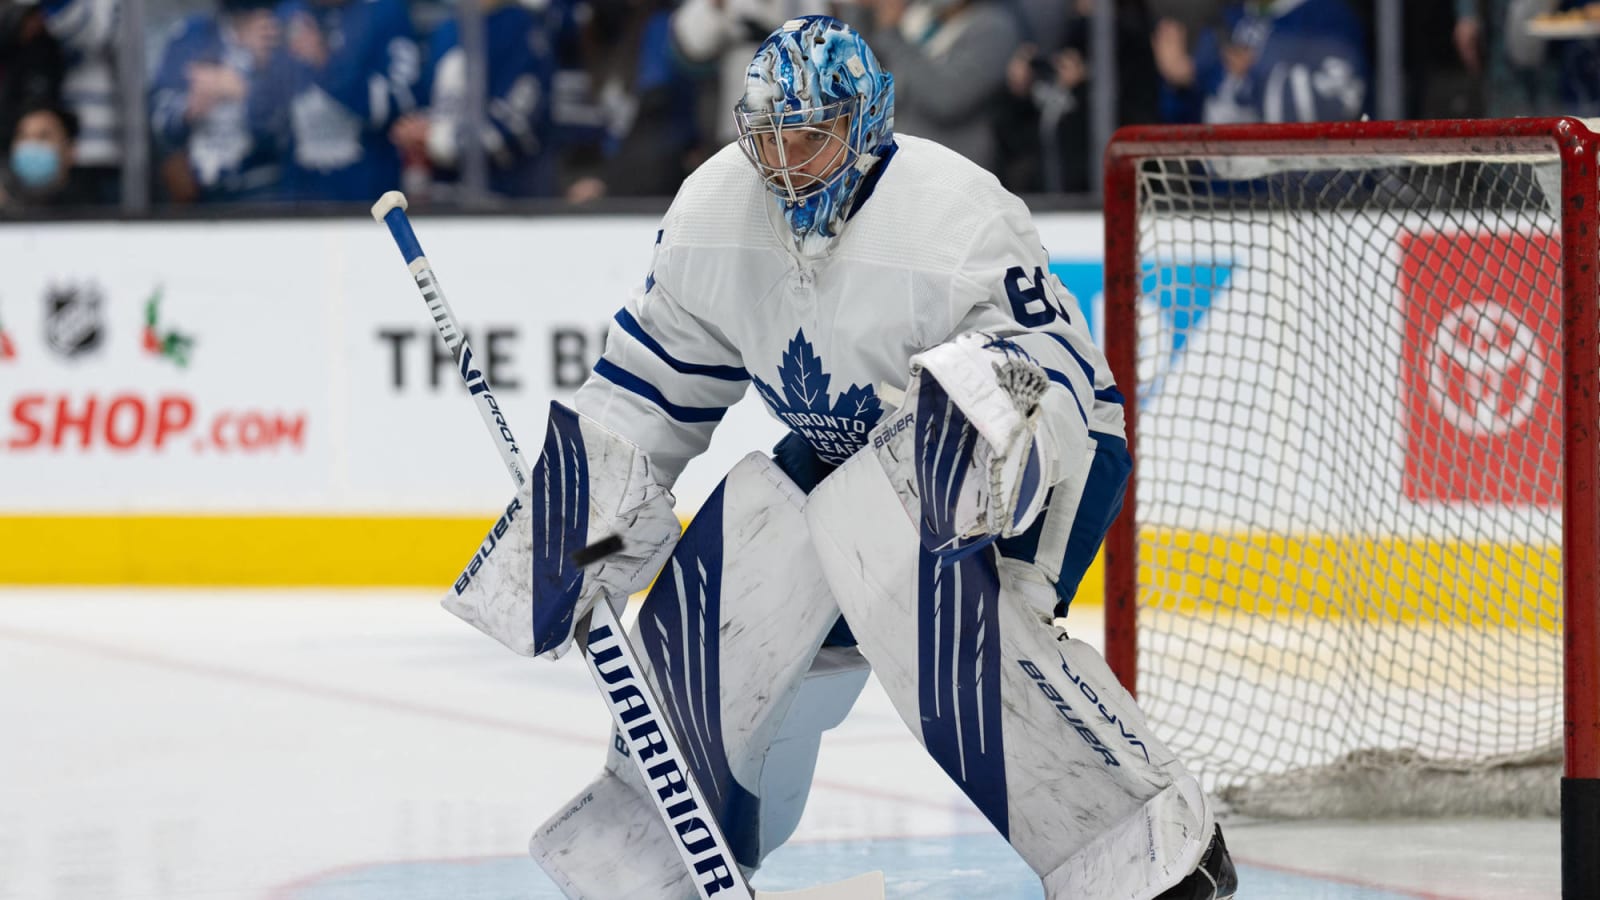 News from the Rink: Marner not in Leafs lineup tonight, Woll starts vs. Jets